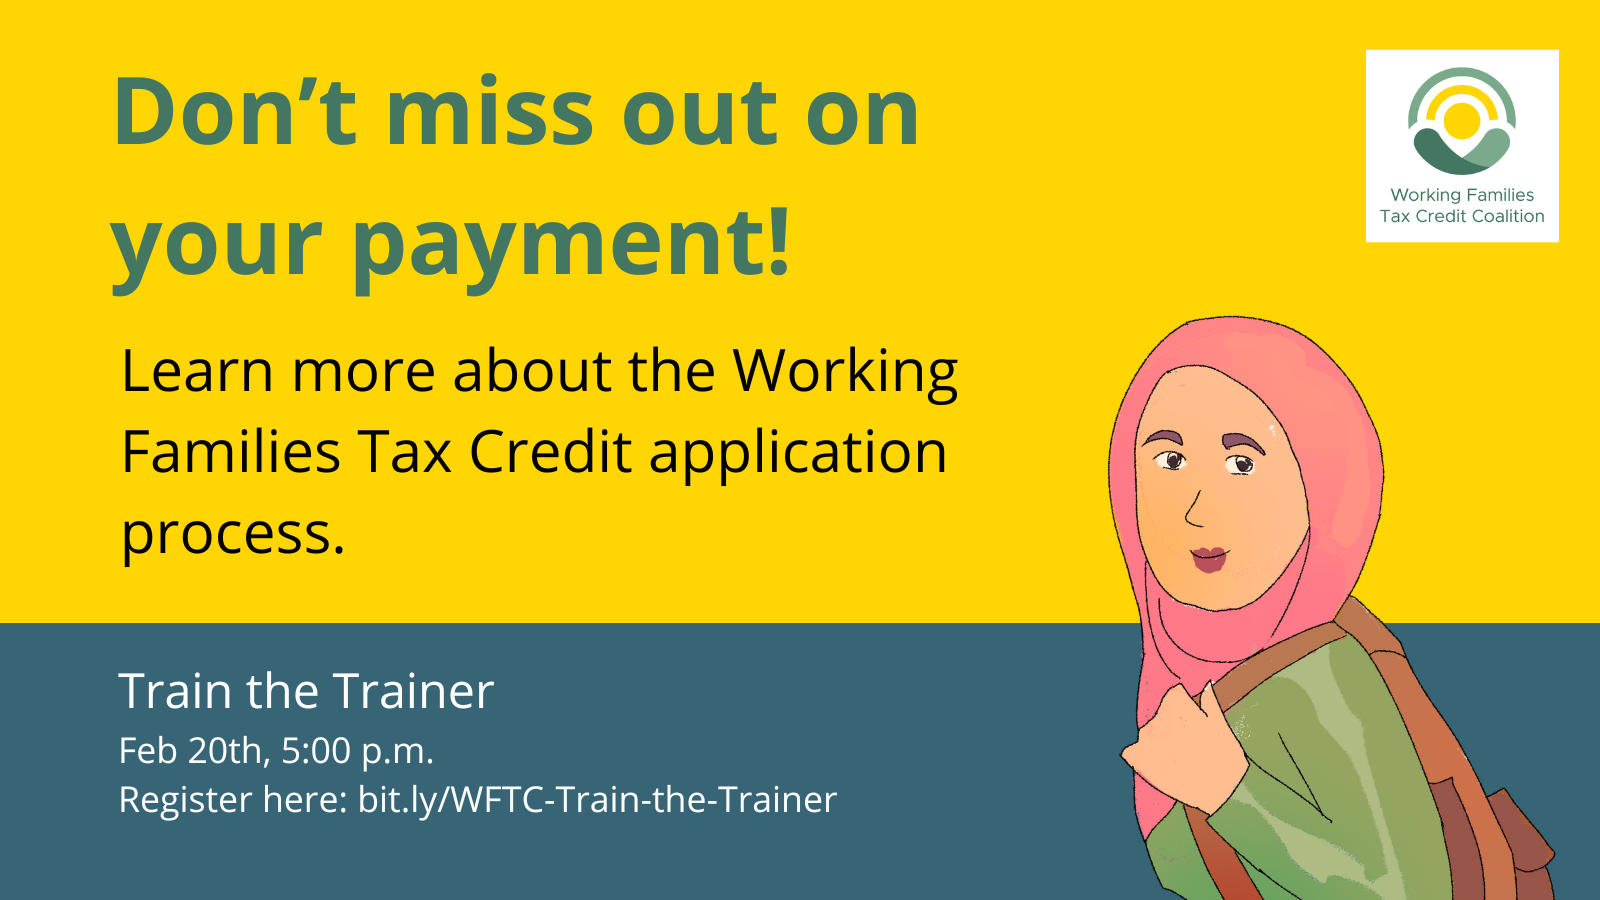 Don't miss out on your payment! Learn more about the Working Families Tax Credit application process.